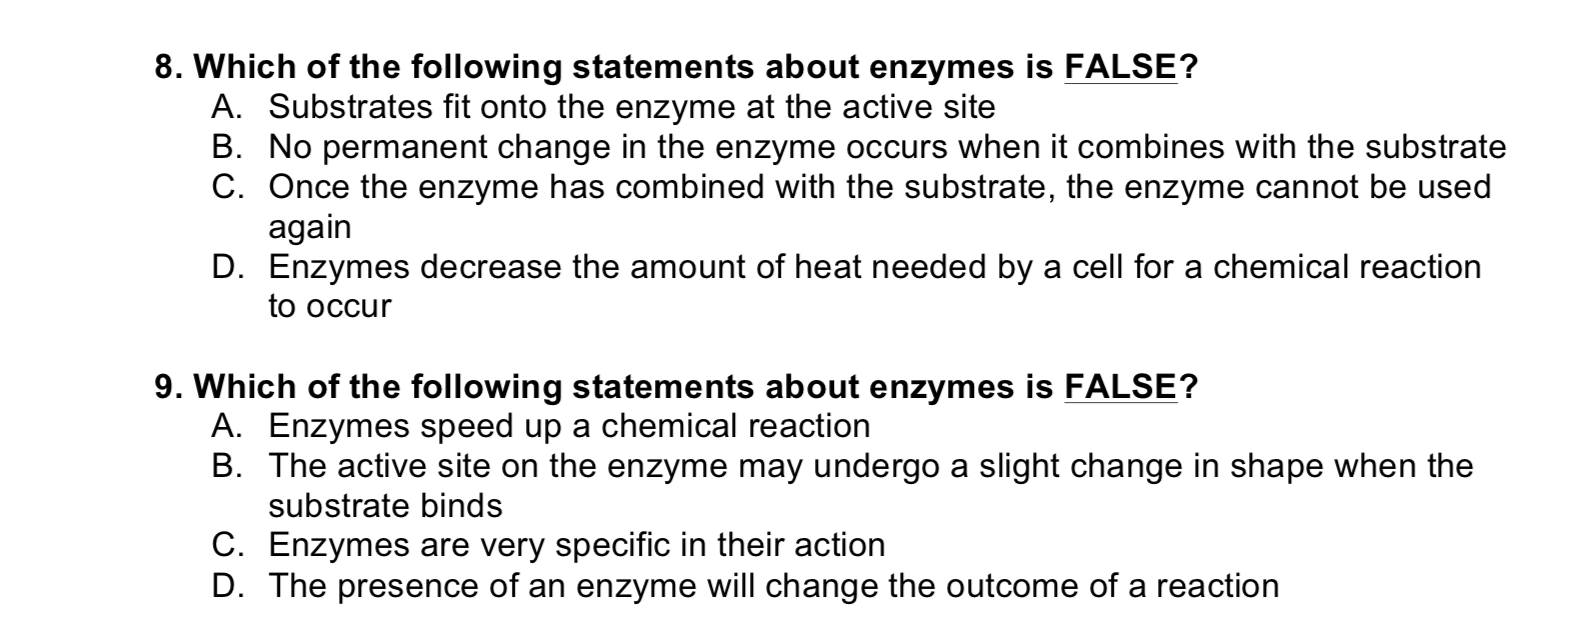 Which of the following statements about enzymes is false